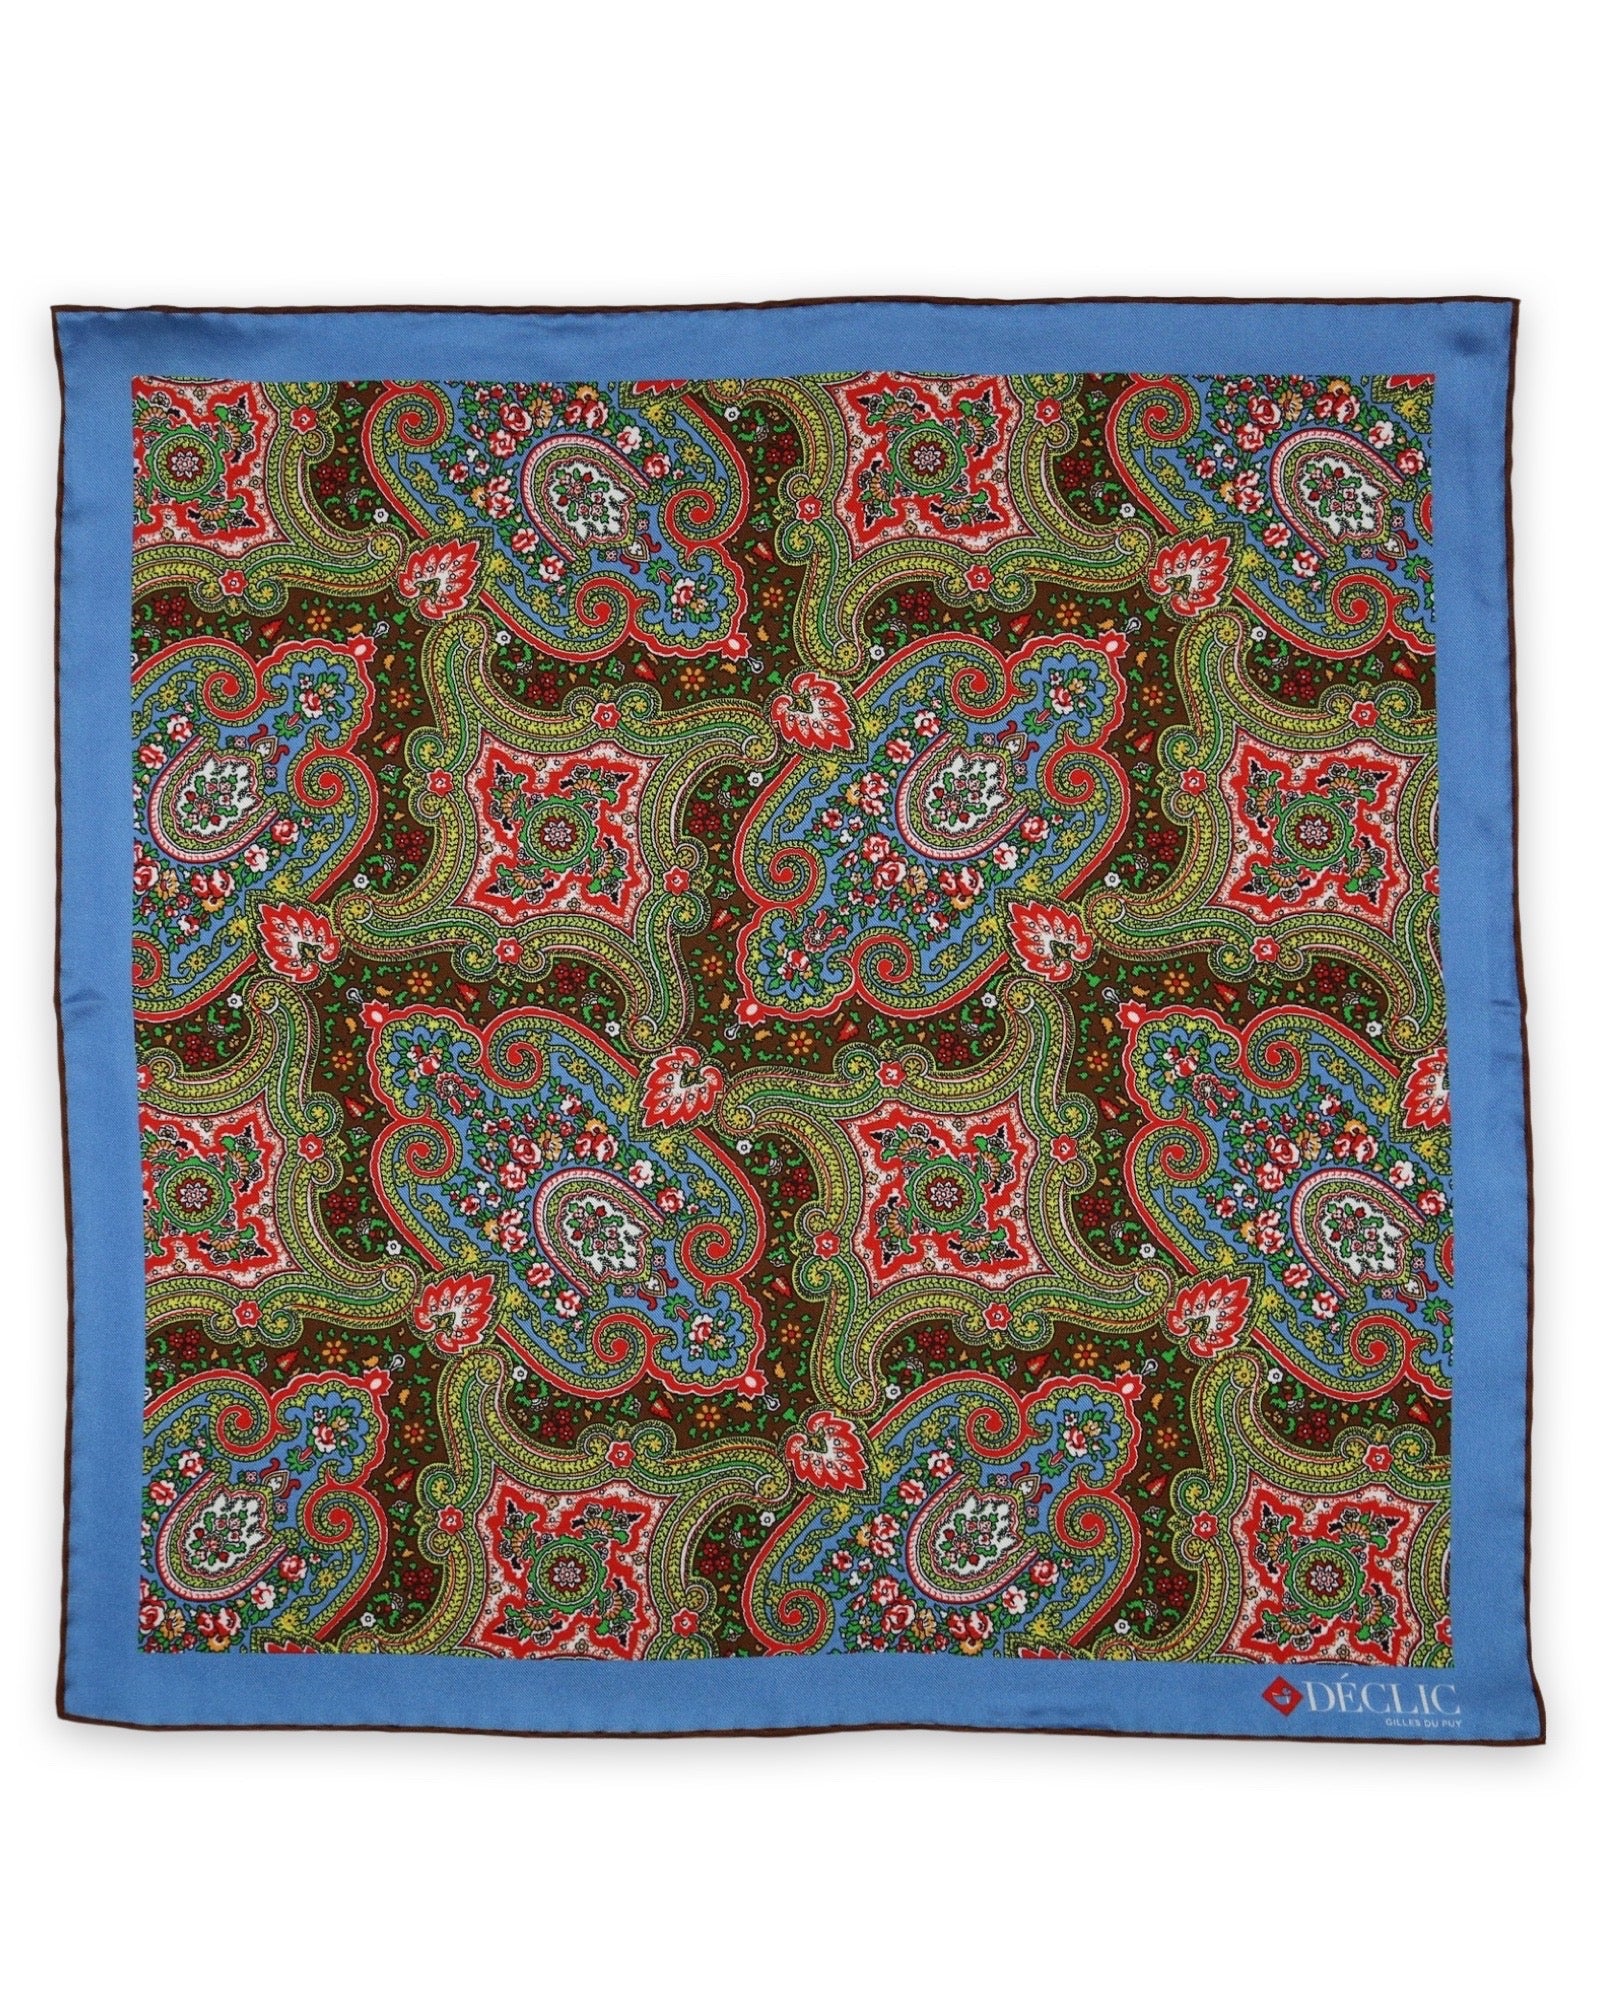 DÉCLIC Whitby Paisley Pocket Square - Assorted